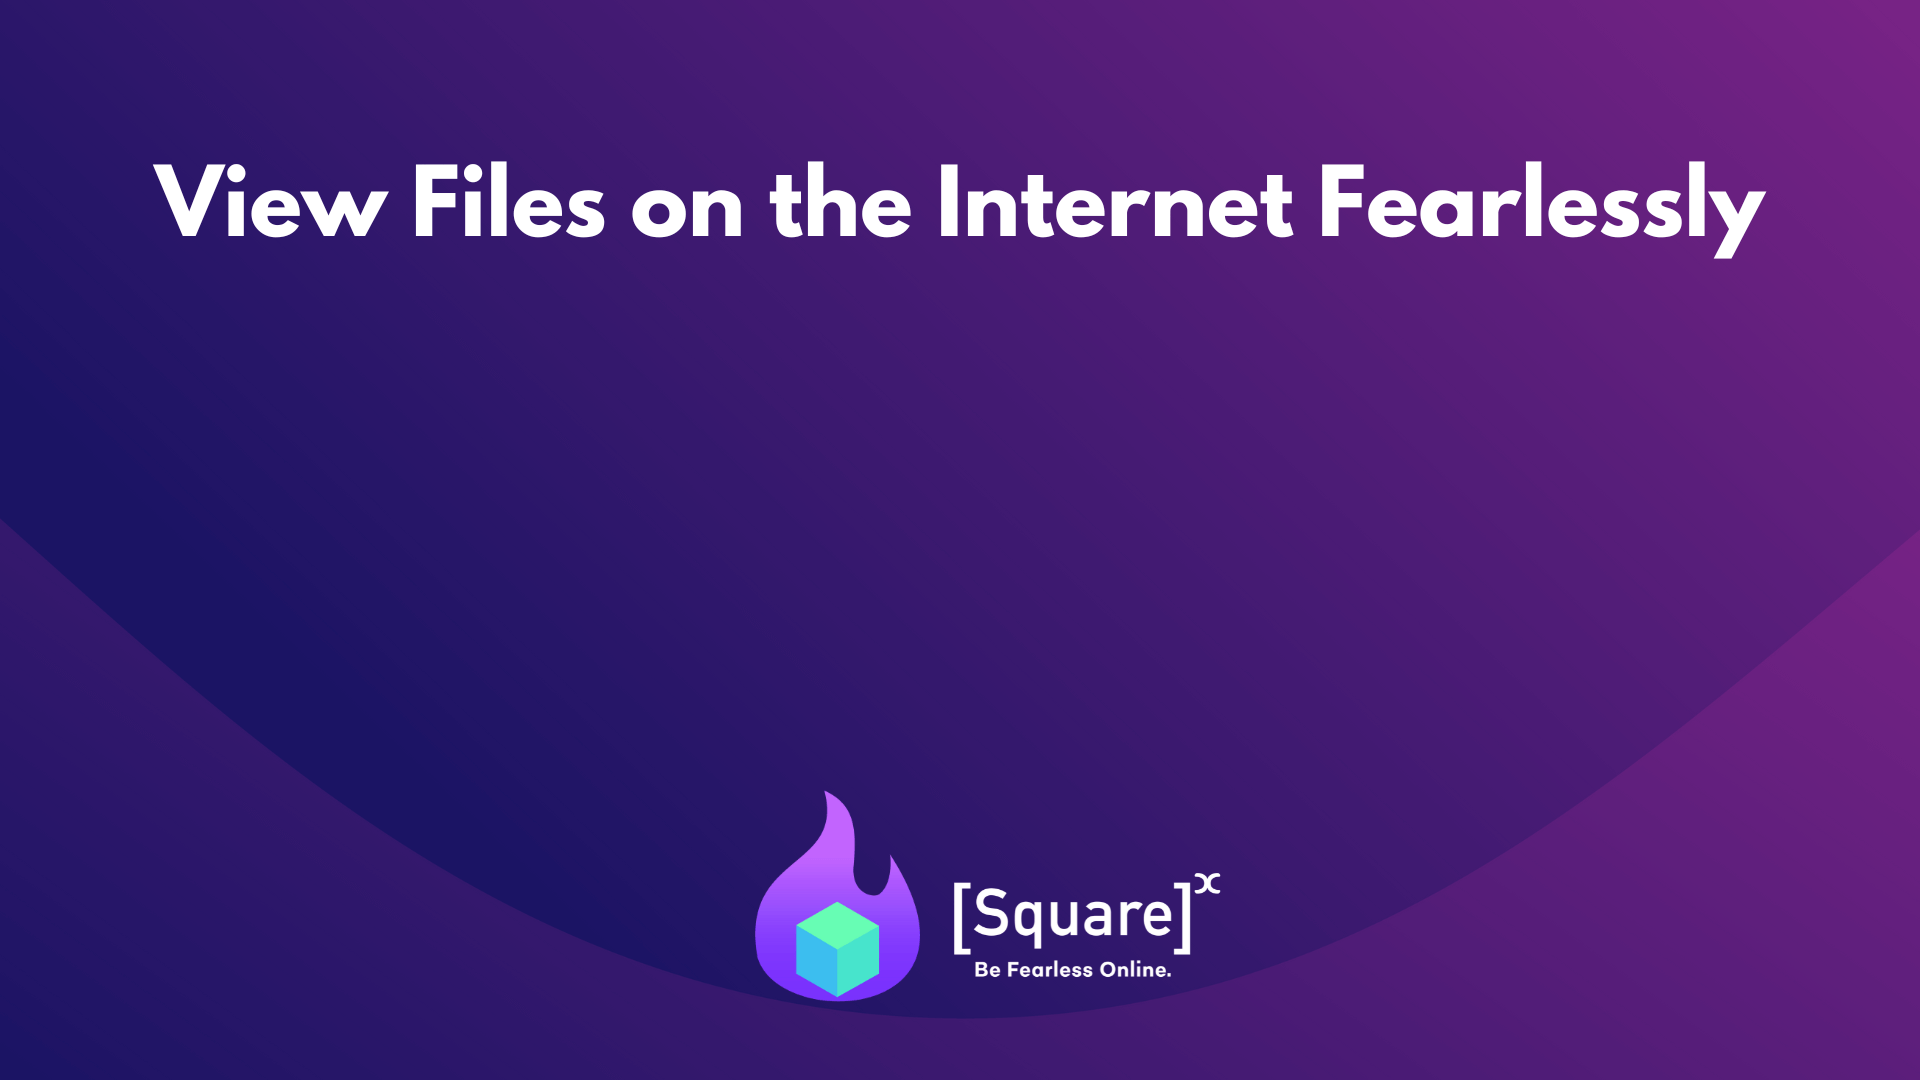 View files on the Internet fearlessly